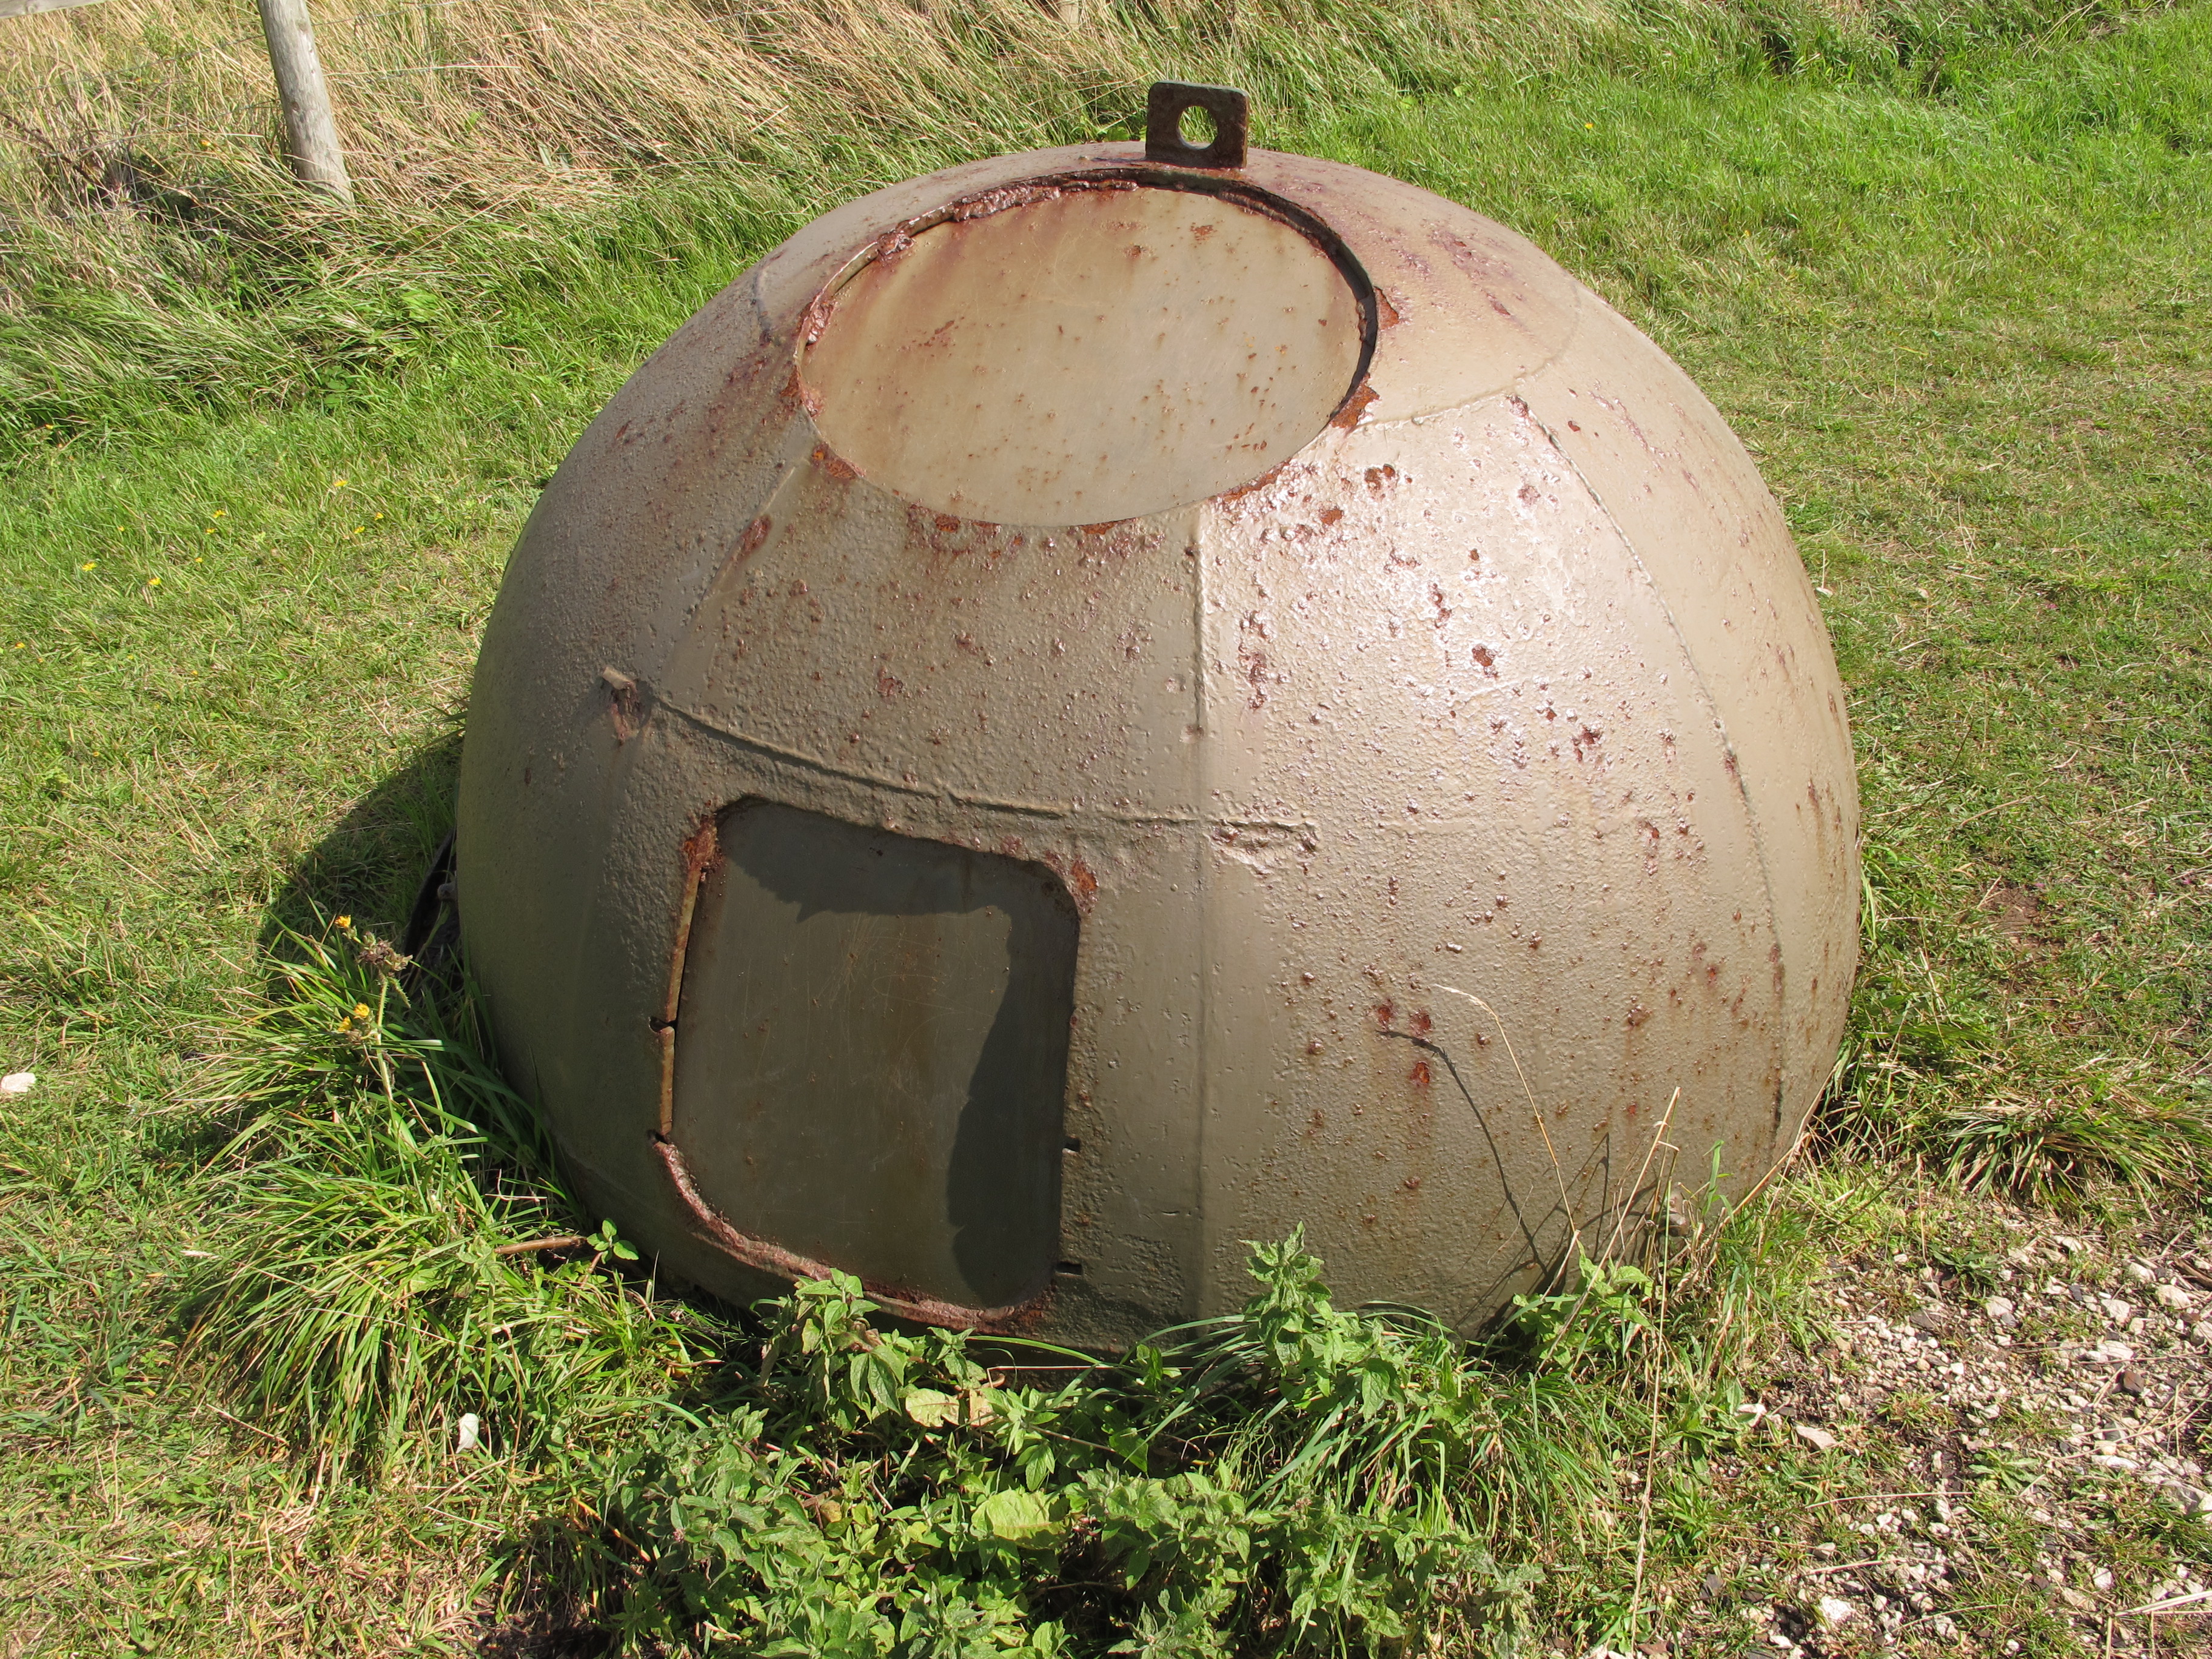 Refurbished and repaired a few years previous this Alan Williams Turret can be seen at Worbarrow Bay, Tyneham, Dorset. Picture by Tim Denton Summer 2015